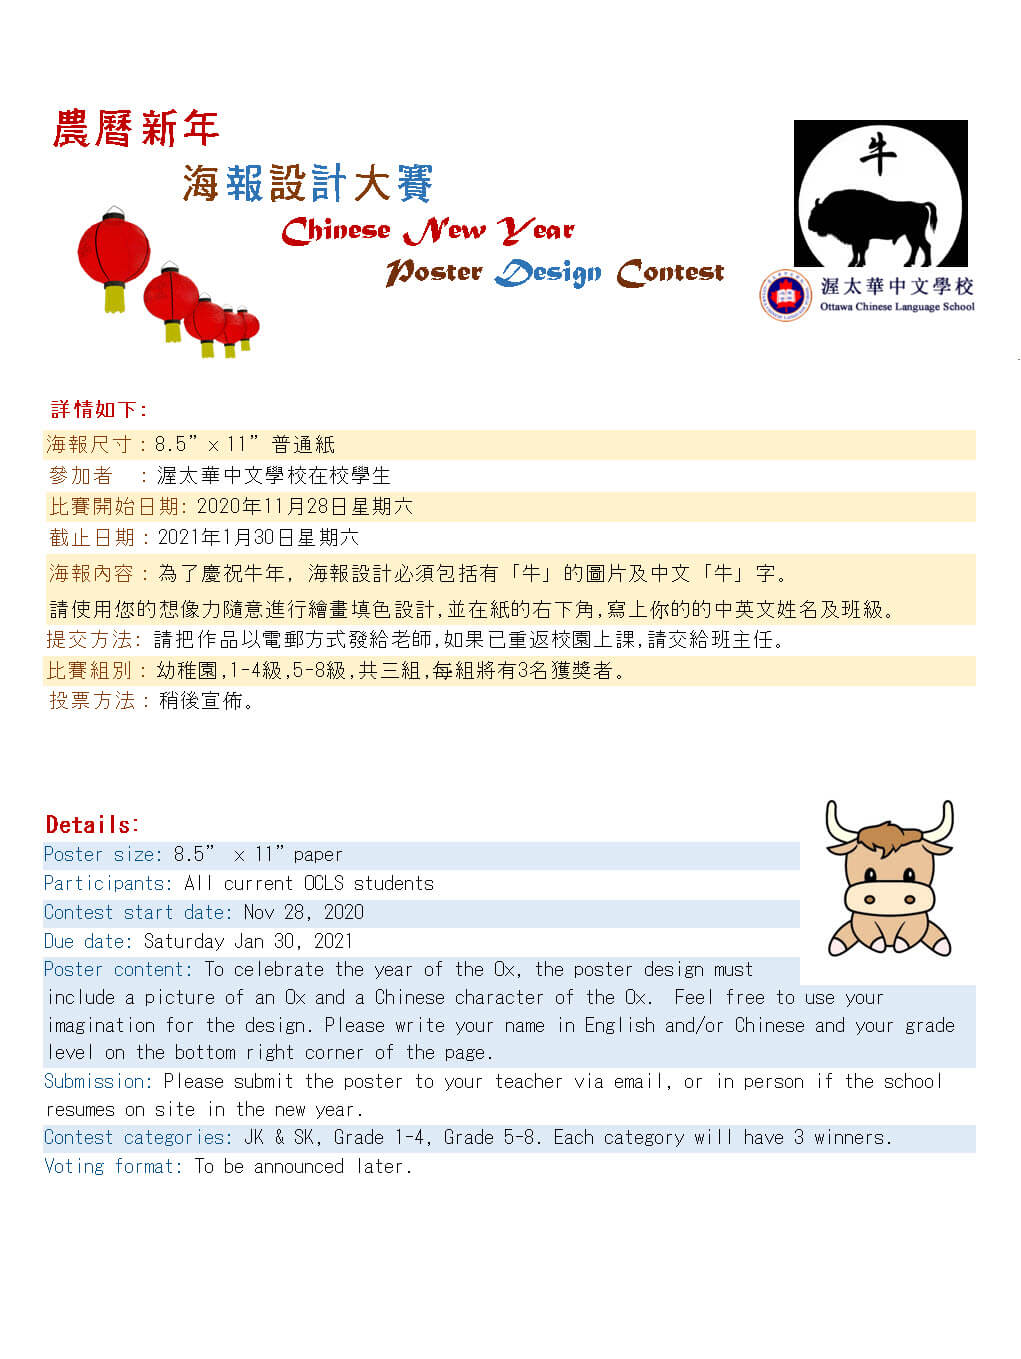 Chinese New Year Poster Competition 2021